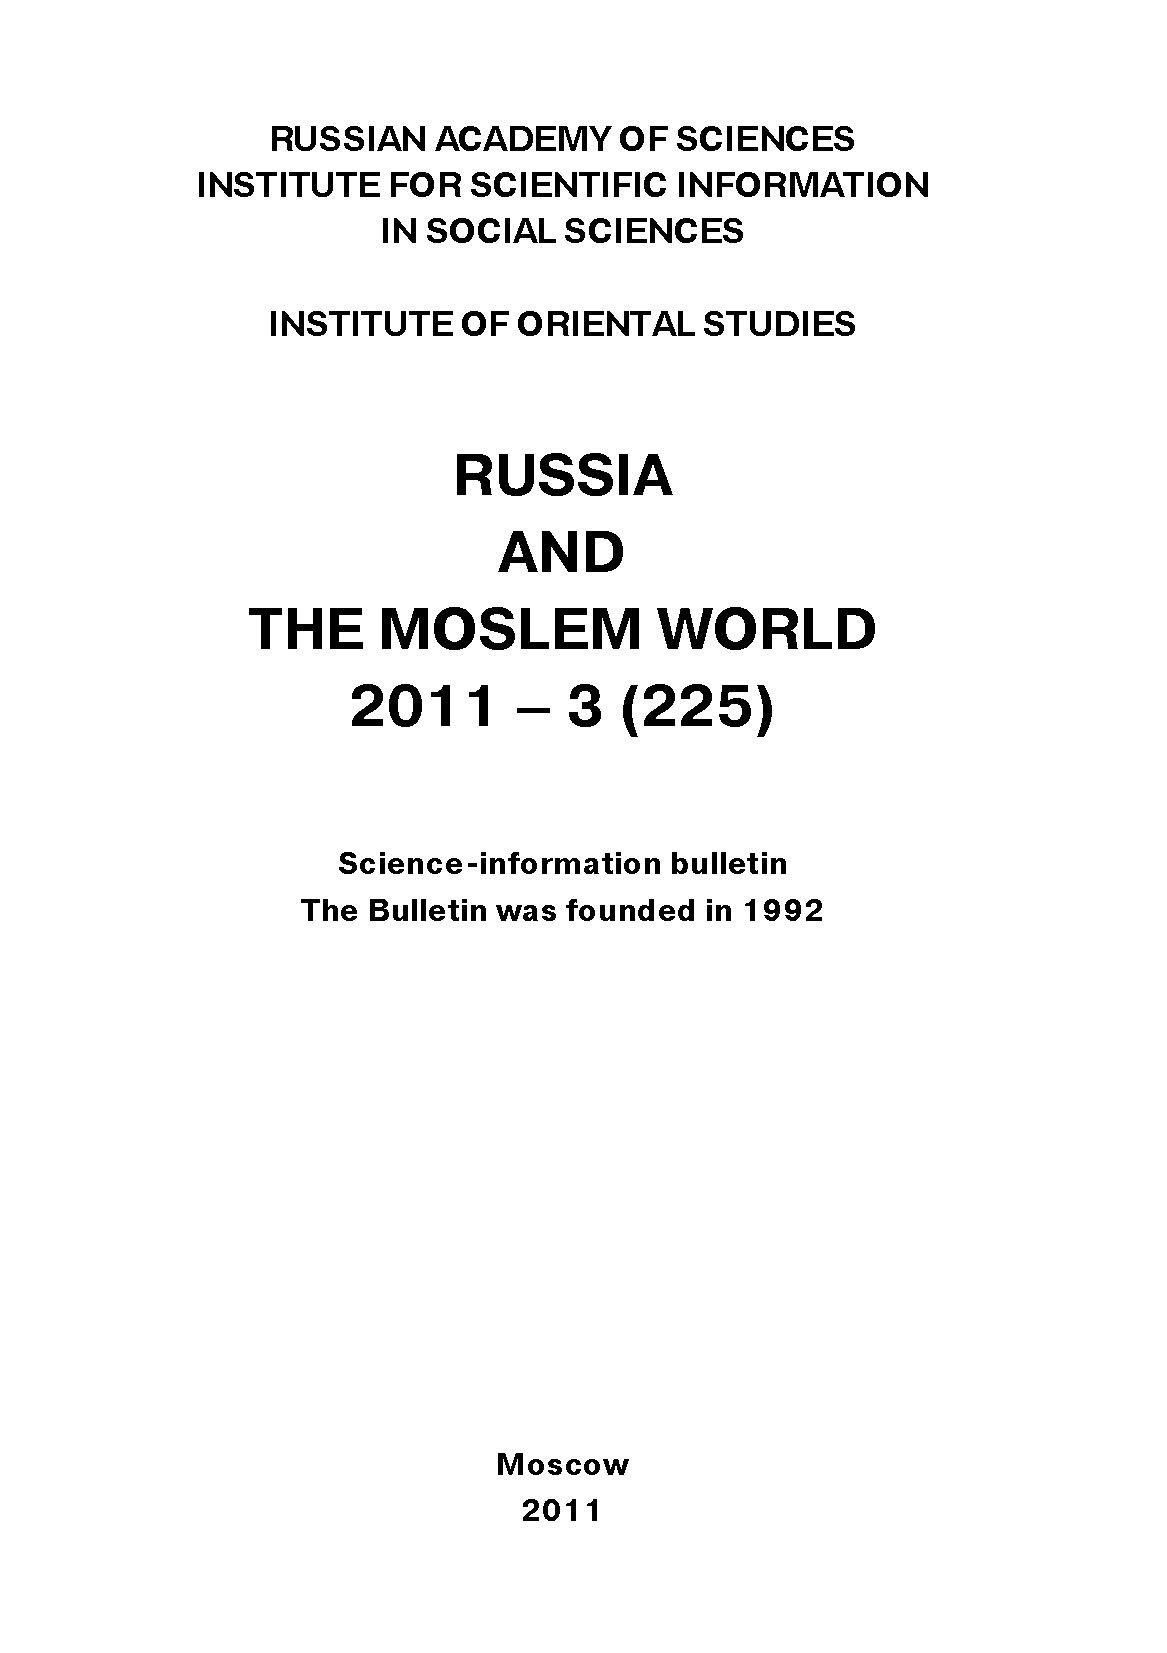 Russia and the Moslem World№ 03 / 2011